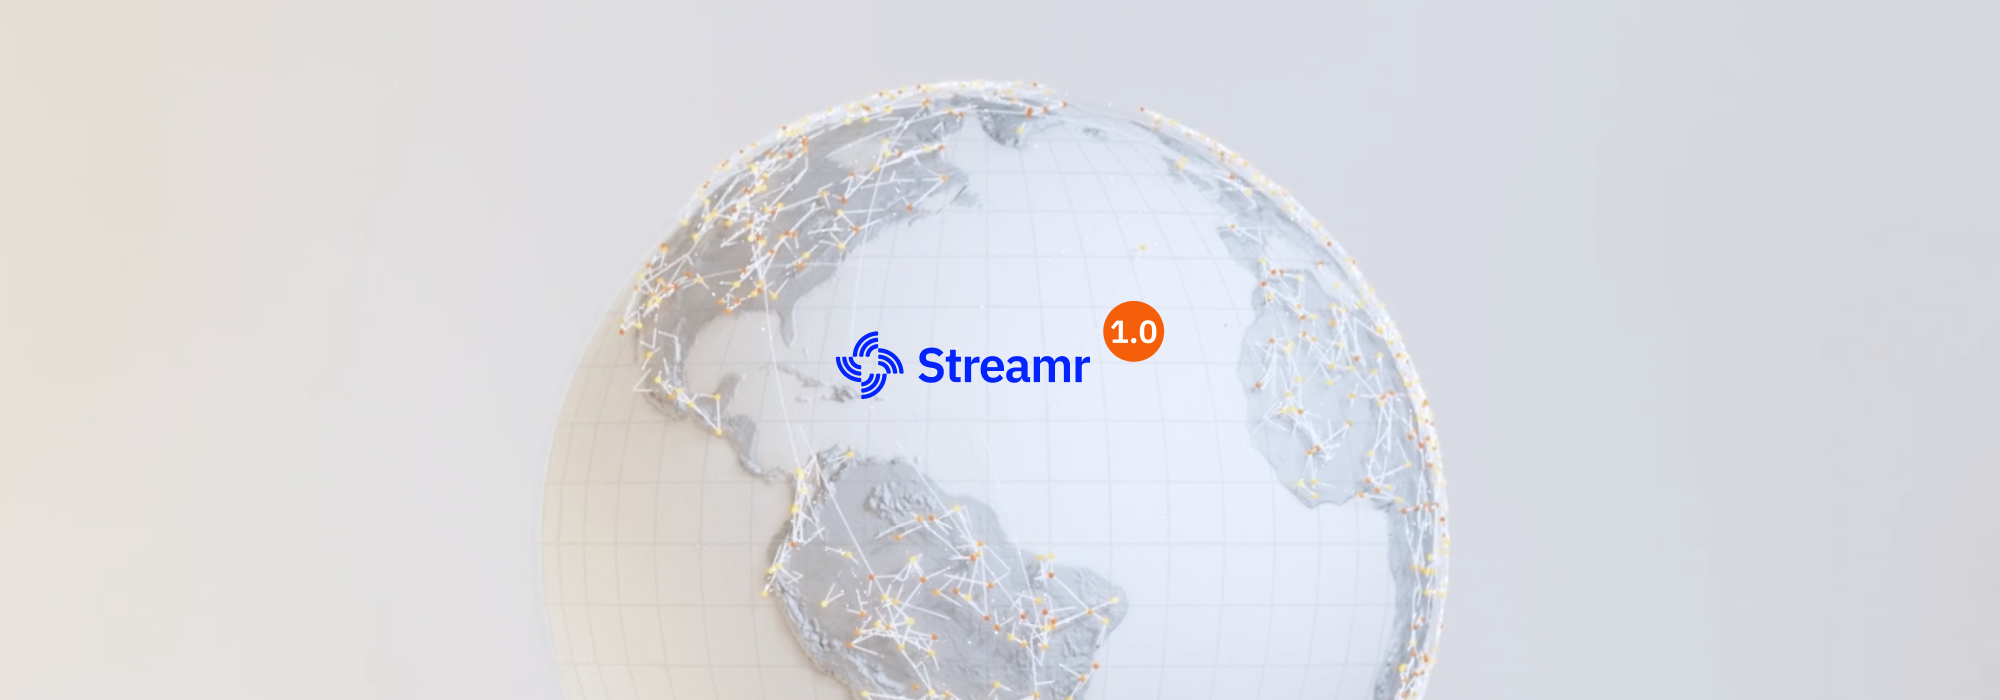 Breaking new ground with decentralized incentivizes in Streamr 1.0